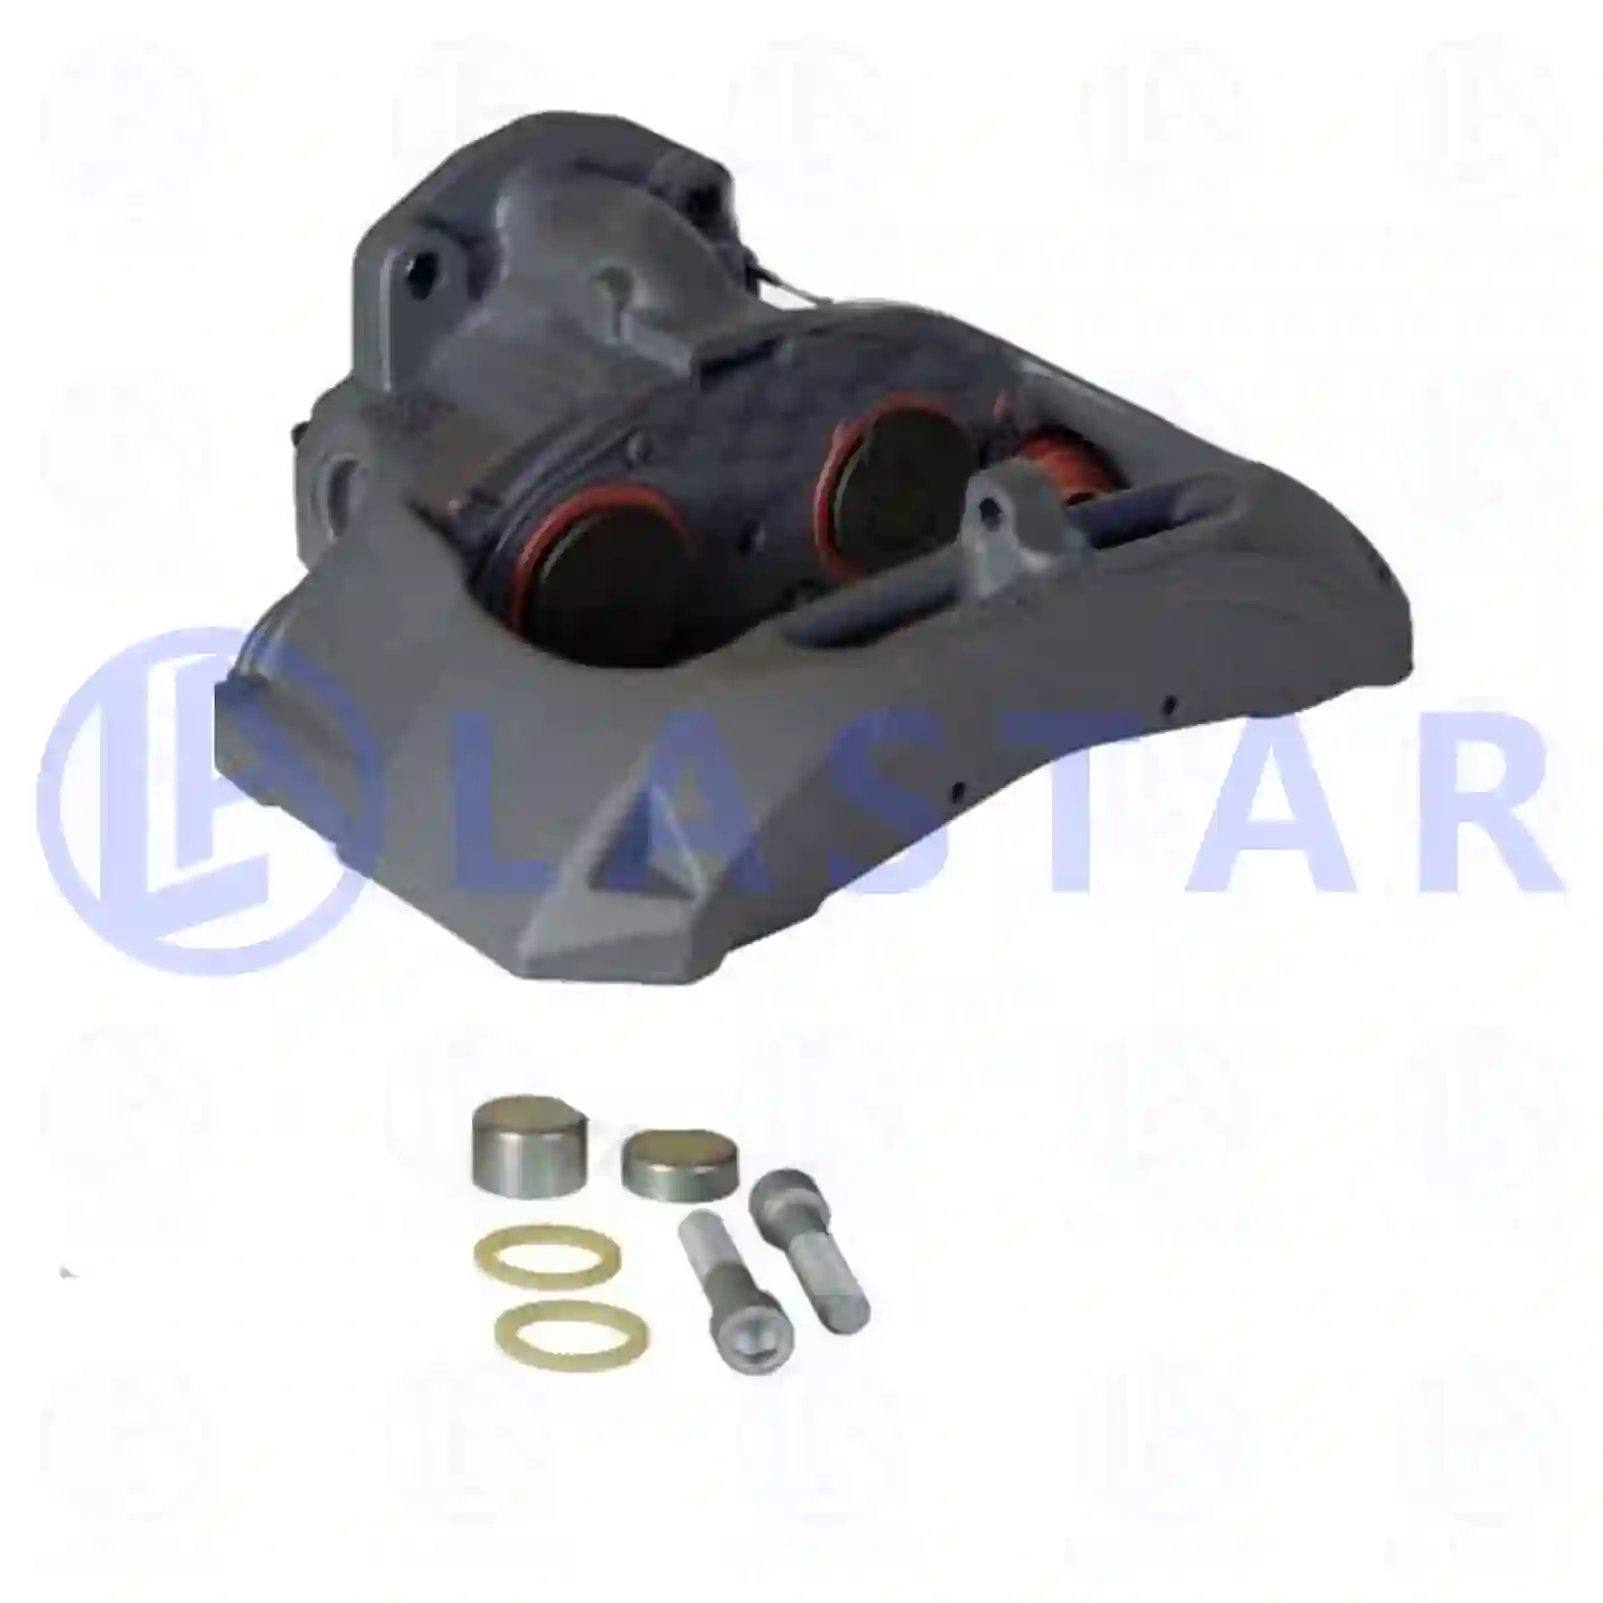 Brake Caliper Brake caliper, reman. / without old core, la no: 77715869 ,  oem no:14000553, SM48611K, SM48613K, SM48615K, SM48617K, SM48619K, SM48636K, SM48638K, SM48642K, SM48644K, SM4867K, SM4869K, 65847042, 709285159, 9285159, S269231L, 81508046434, 81508046454, 81508046460, 81508046462, 81508046464, 6274300090, 011014064, 011015480, 082136010, 10571165, 1363748, 1446730, 1473365, 1511581, 1513591, 1517003, 1731225, 1744255, 1756387, 1921156, 1928819, 1946325, 513591, 517003, 571165, 0501006016 Lastar Spare Part | Truck Spare Parts, Auotomotive Spare Parts